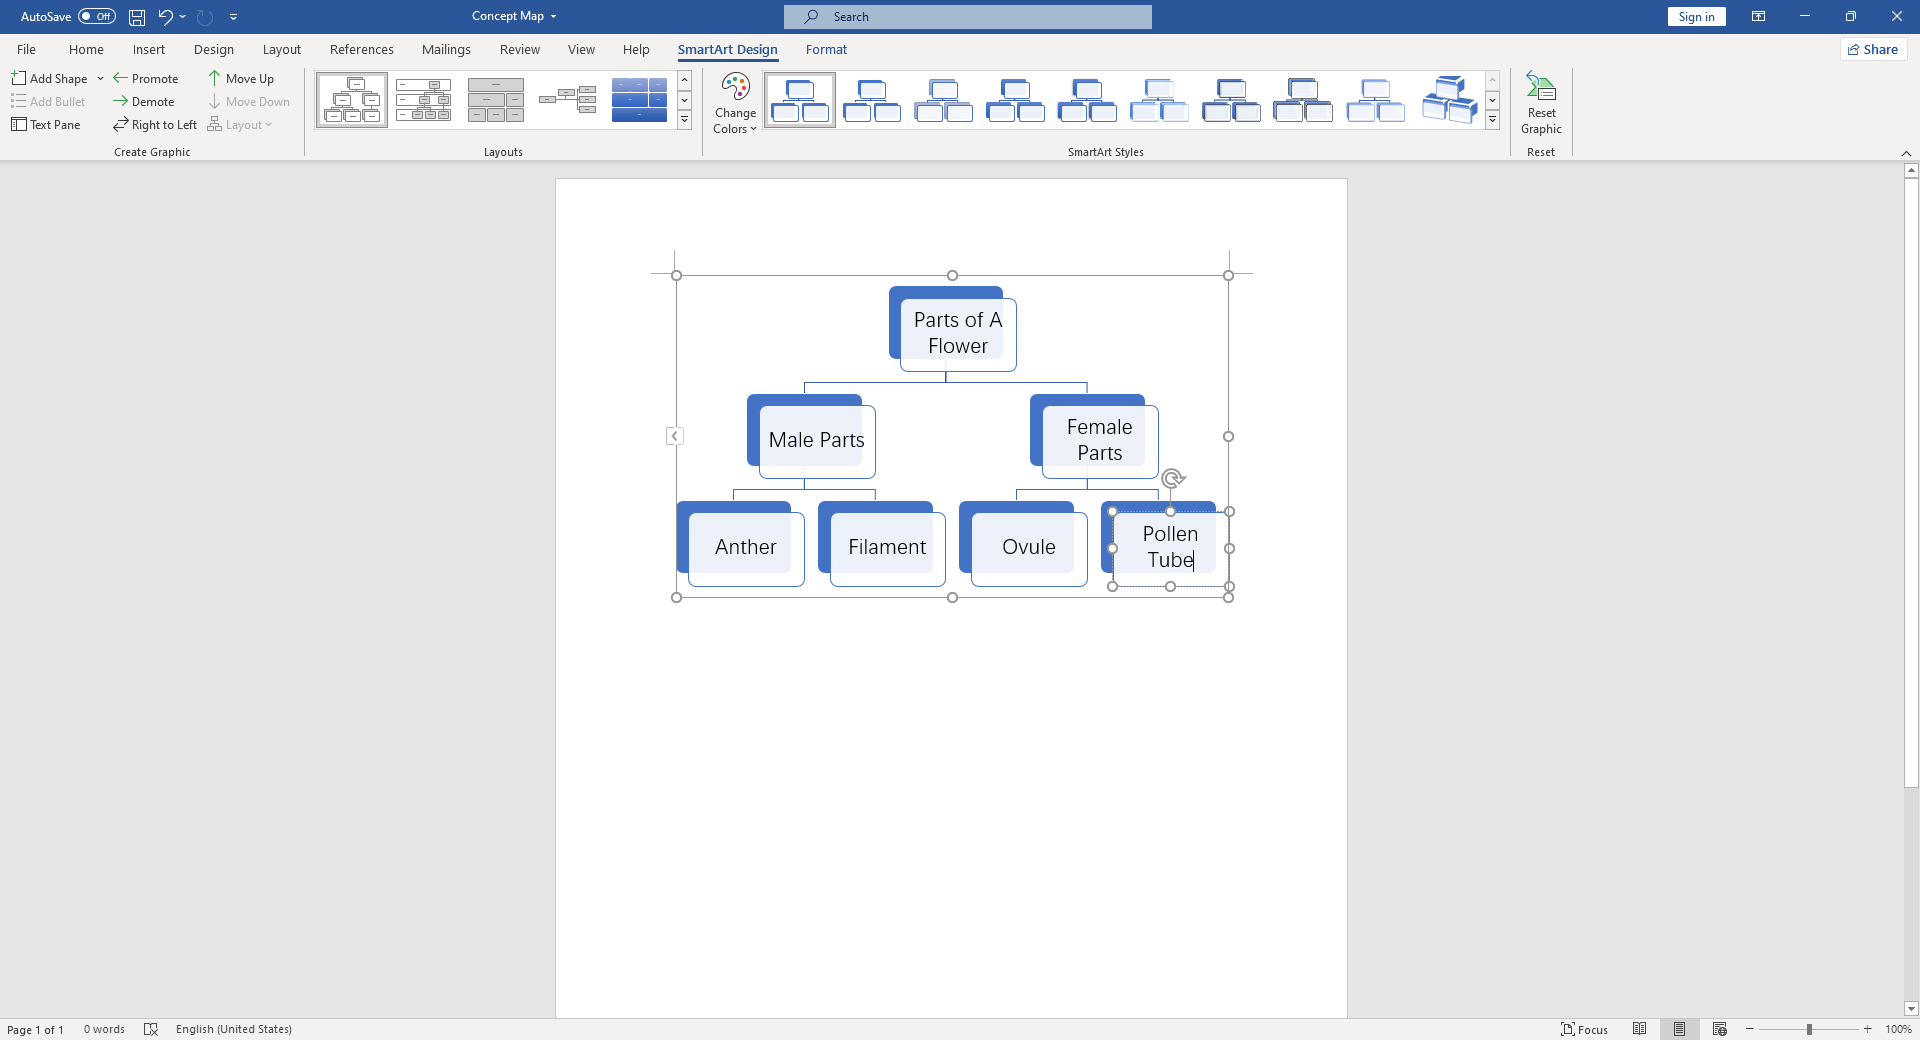 Add Text to Your Concept Map